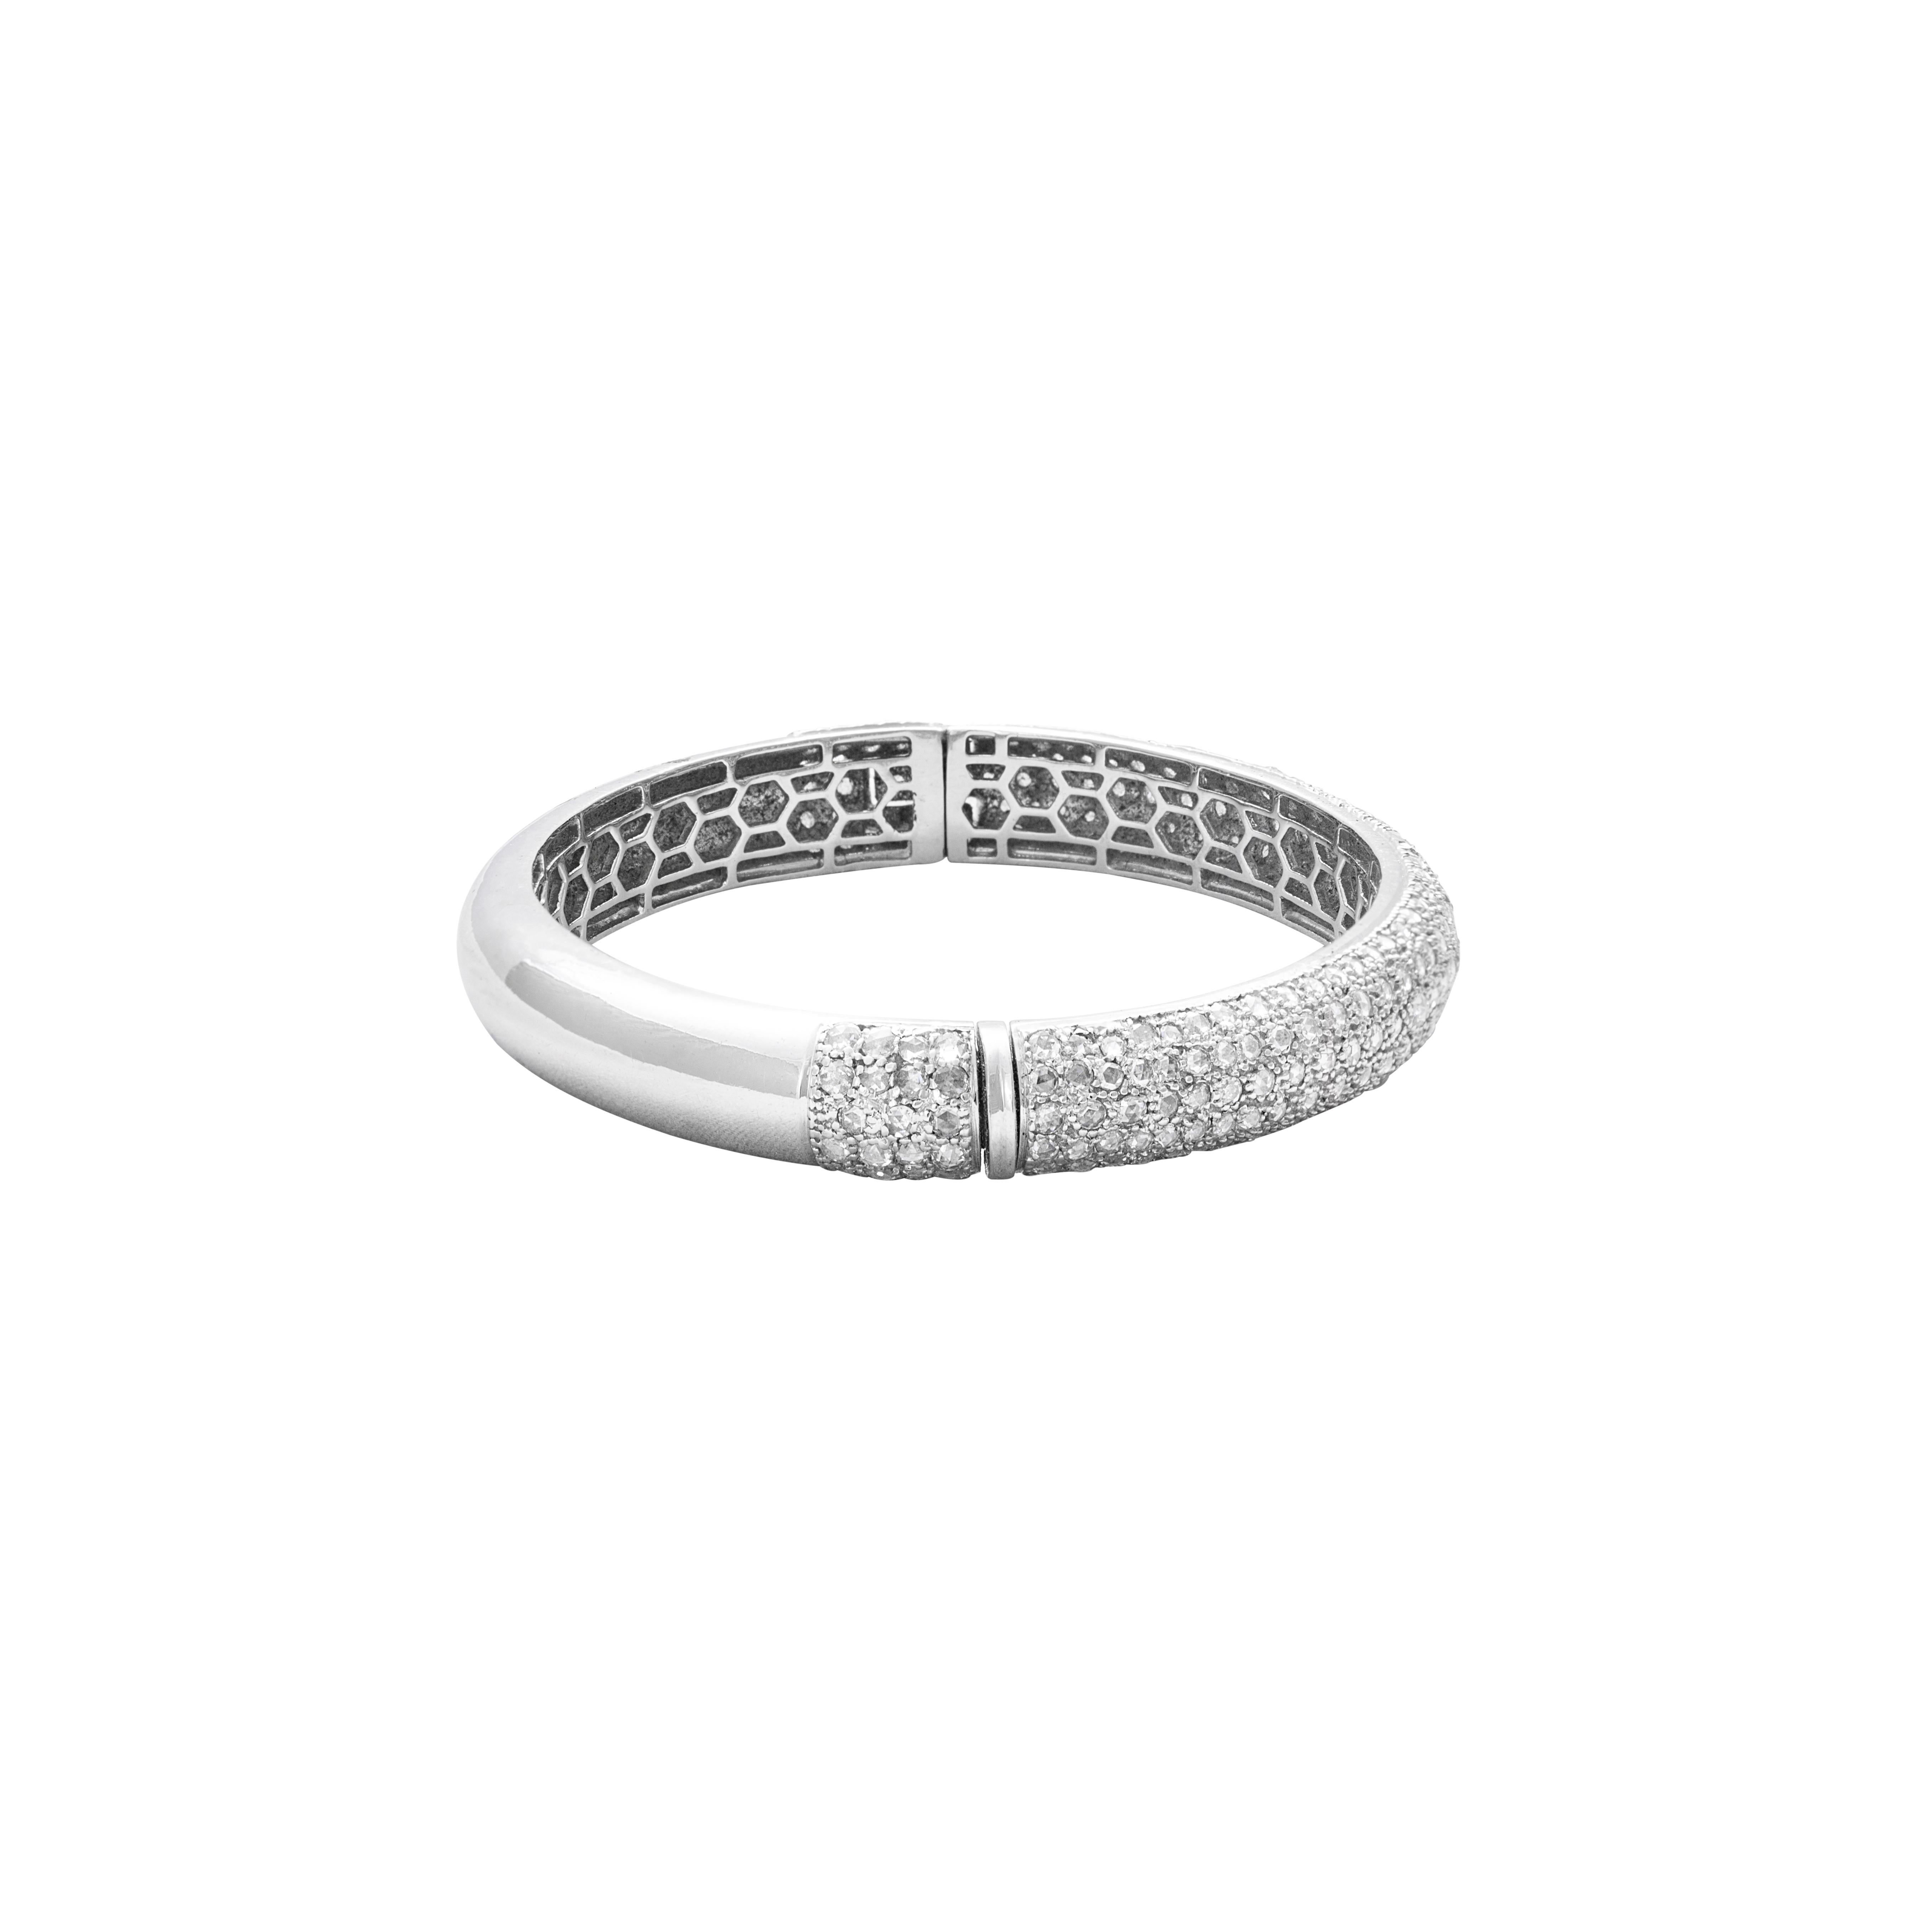 18 Karat White Gold Rosecut Diamond Cuff Bracelet

Beautifully crafted cuff bracelet, set in 18 Karat white gold studded with rosecut diamonds. The honeycomb design on the inside is indicative of the workmanship and design that sets this bracelet